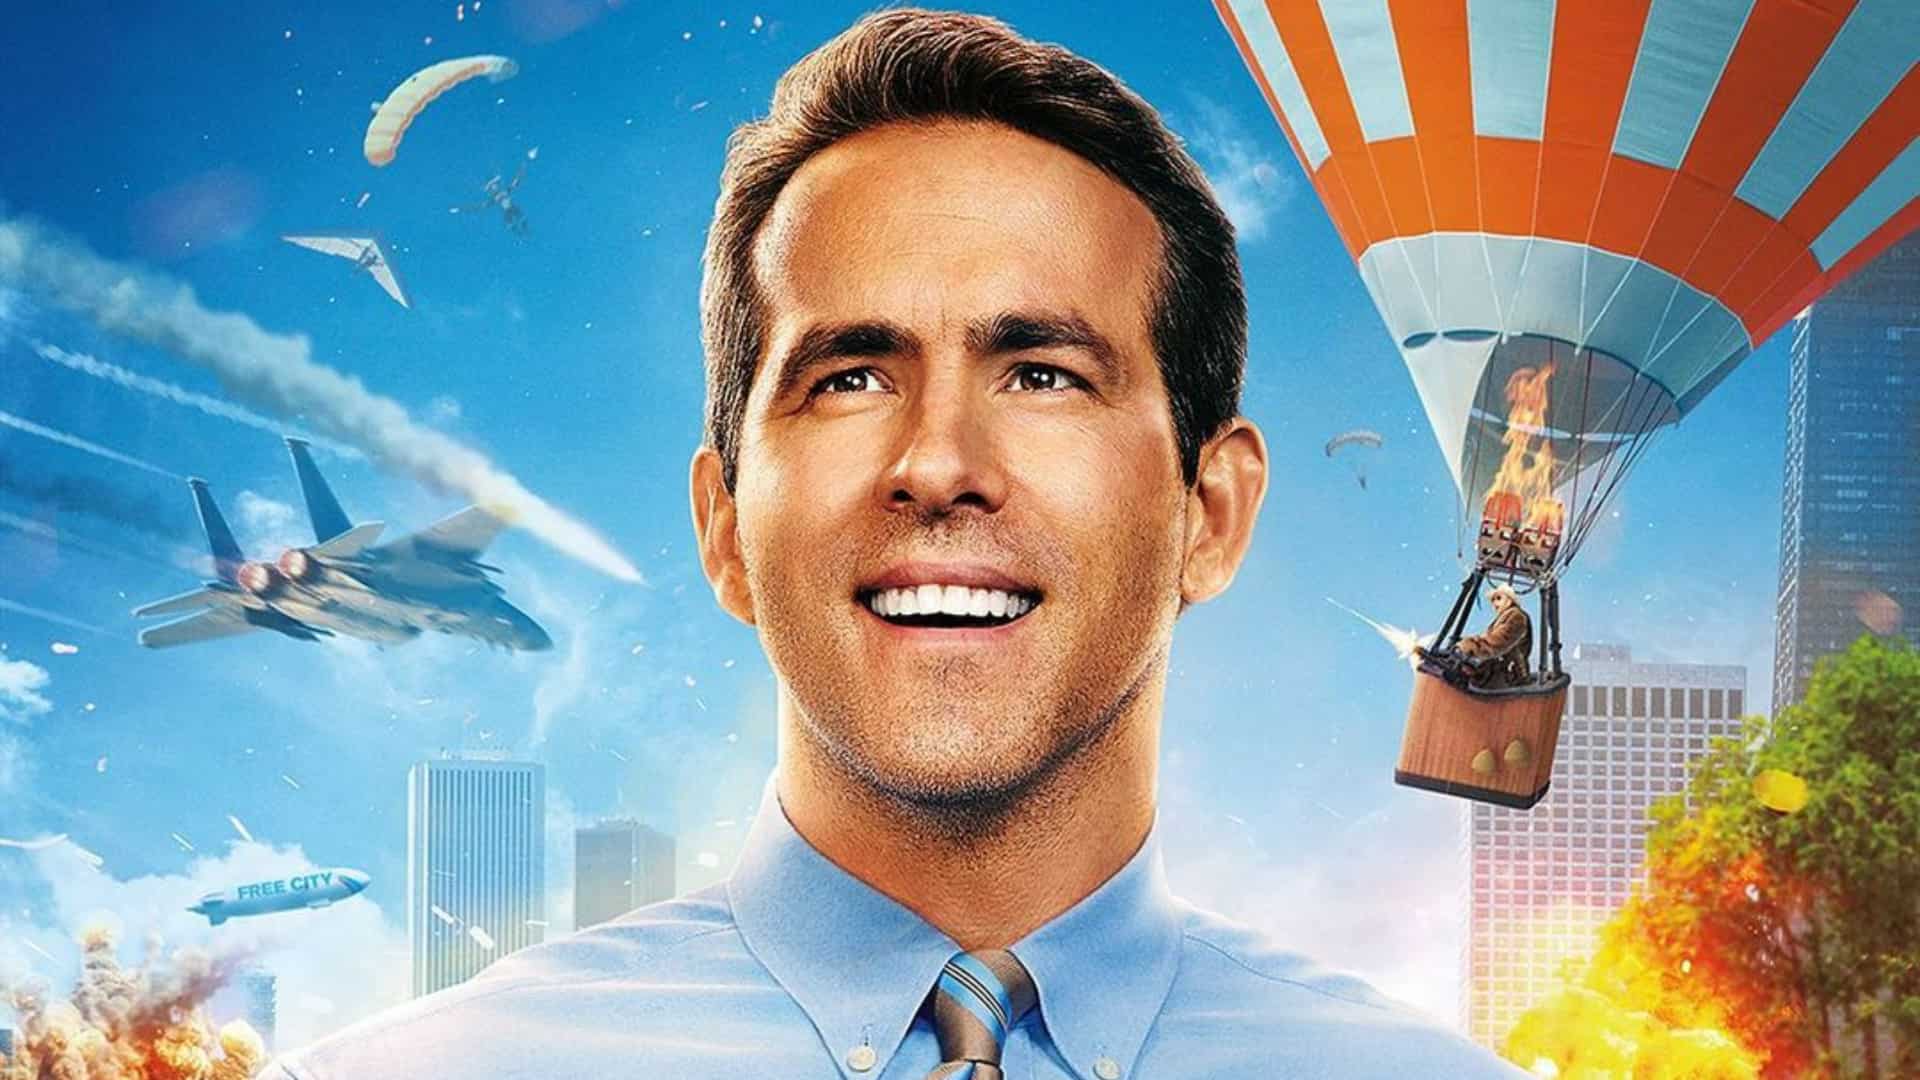 Free Guy release date When and where to watch Ryan Reynolds starrer on OTT